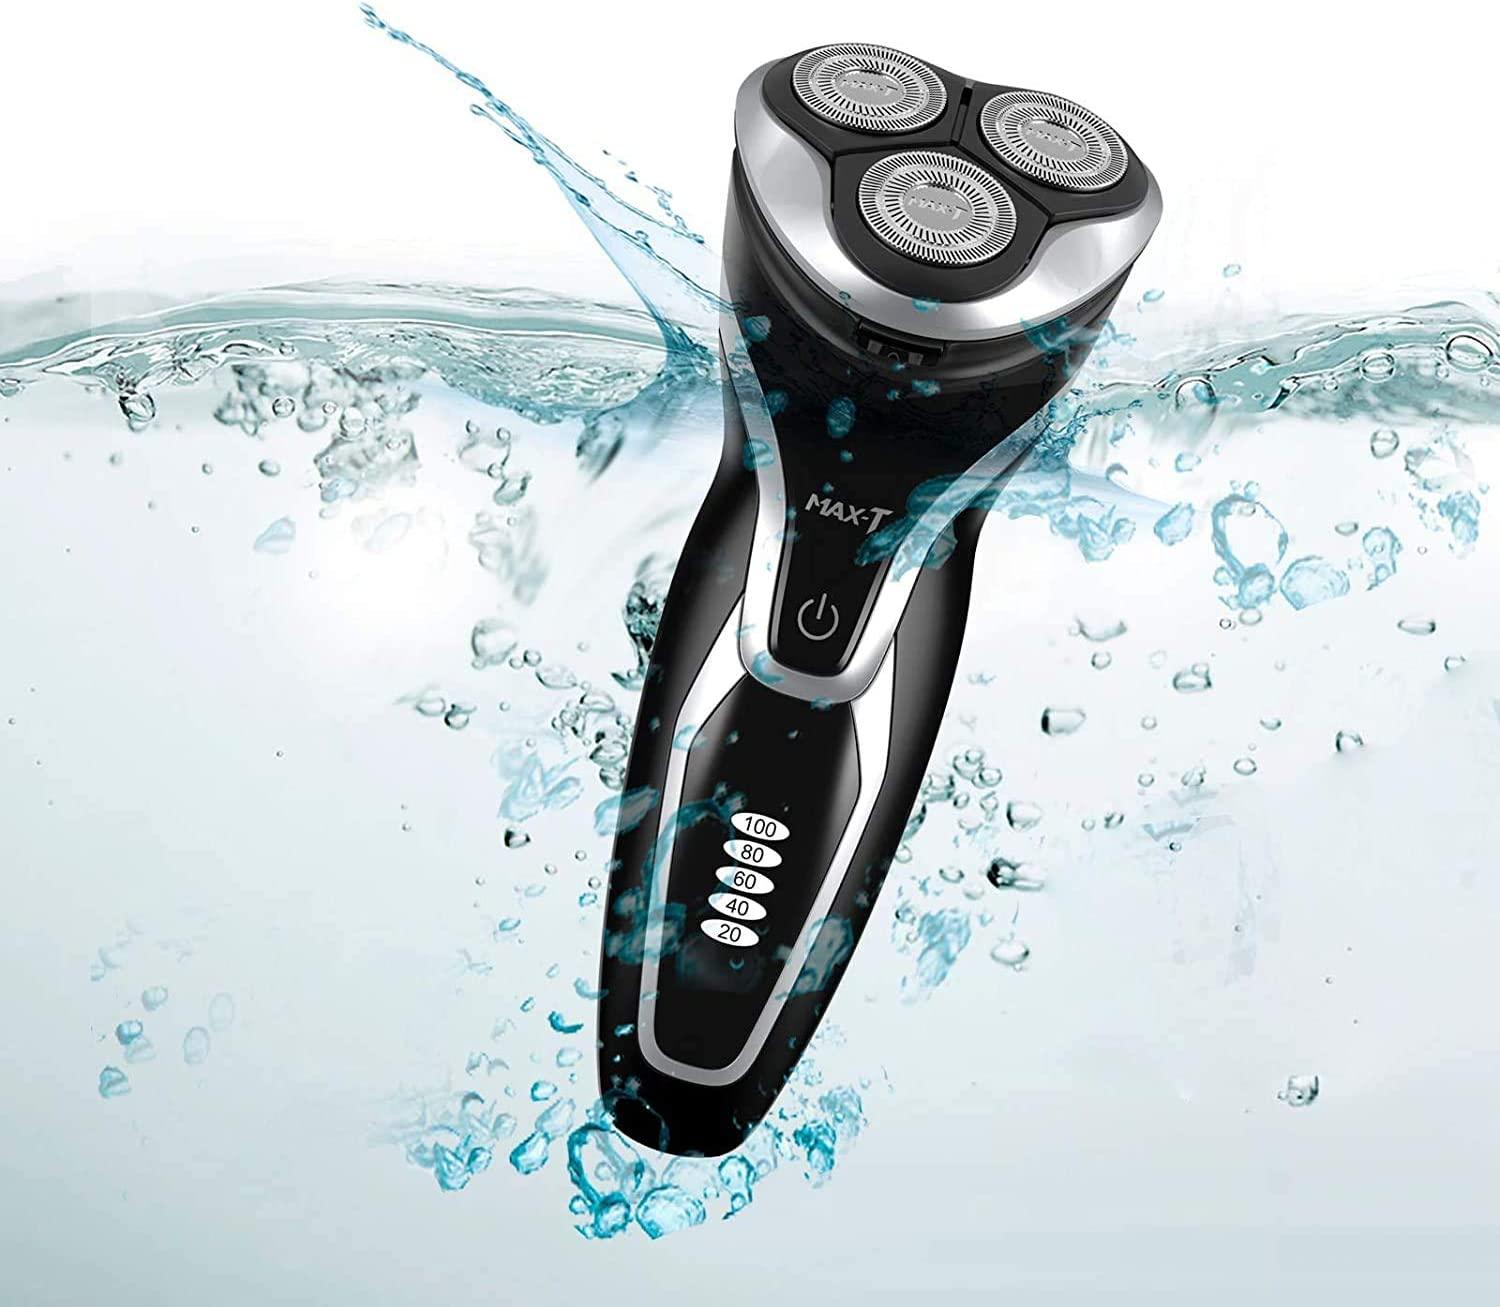 Working of Rotary Electric Shaver
